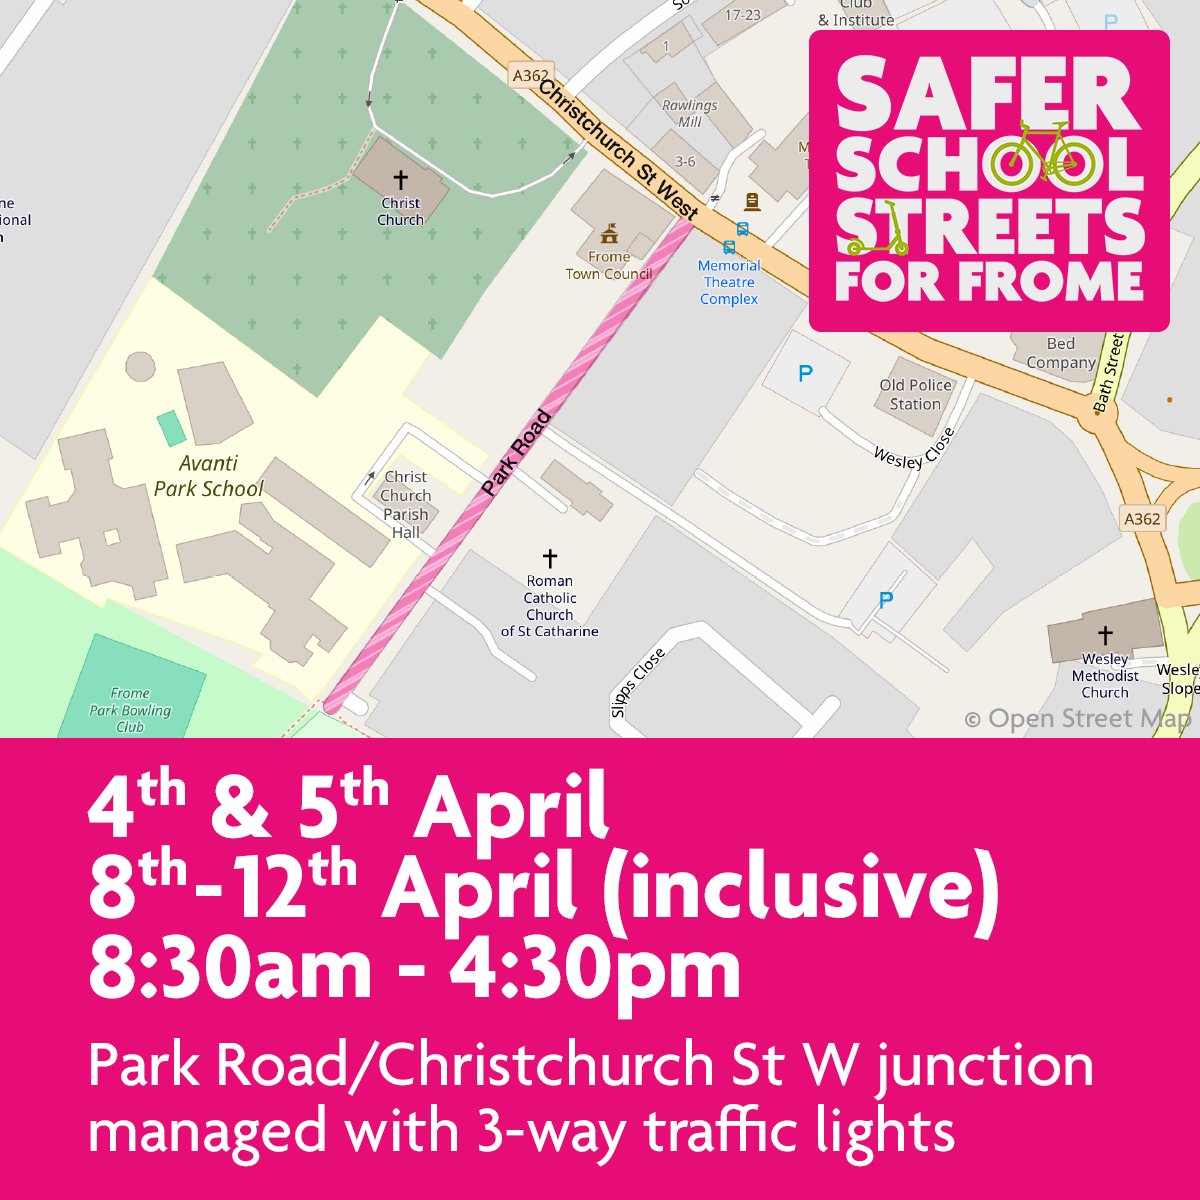 🚧 The work for Frome's Safer School Streets continues, with 3-way lights at the Park Road/Christchurch St West junction on Thurs 4th April, Fri 5th April and Mon 8th April - Fri 12th April, from 8:30am - 4:30pm. Further details of closures here ➡ bit.ly/safer-school-s…